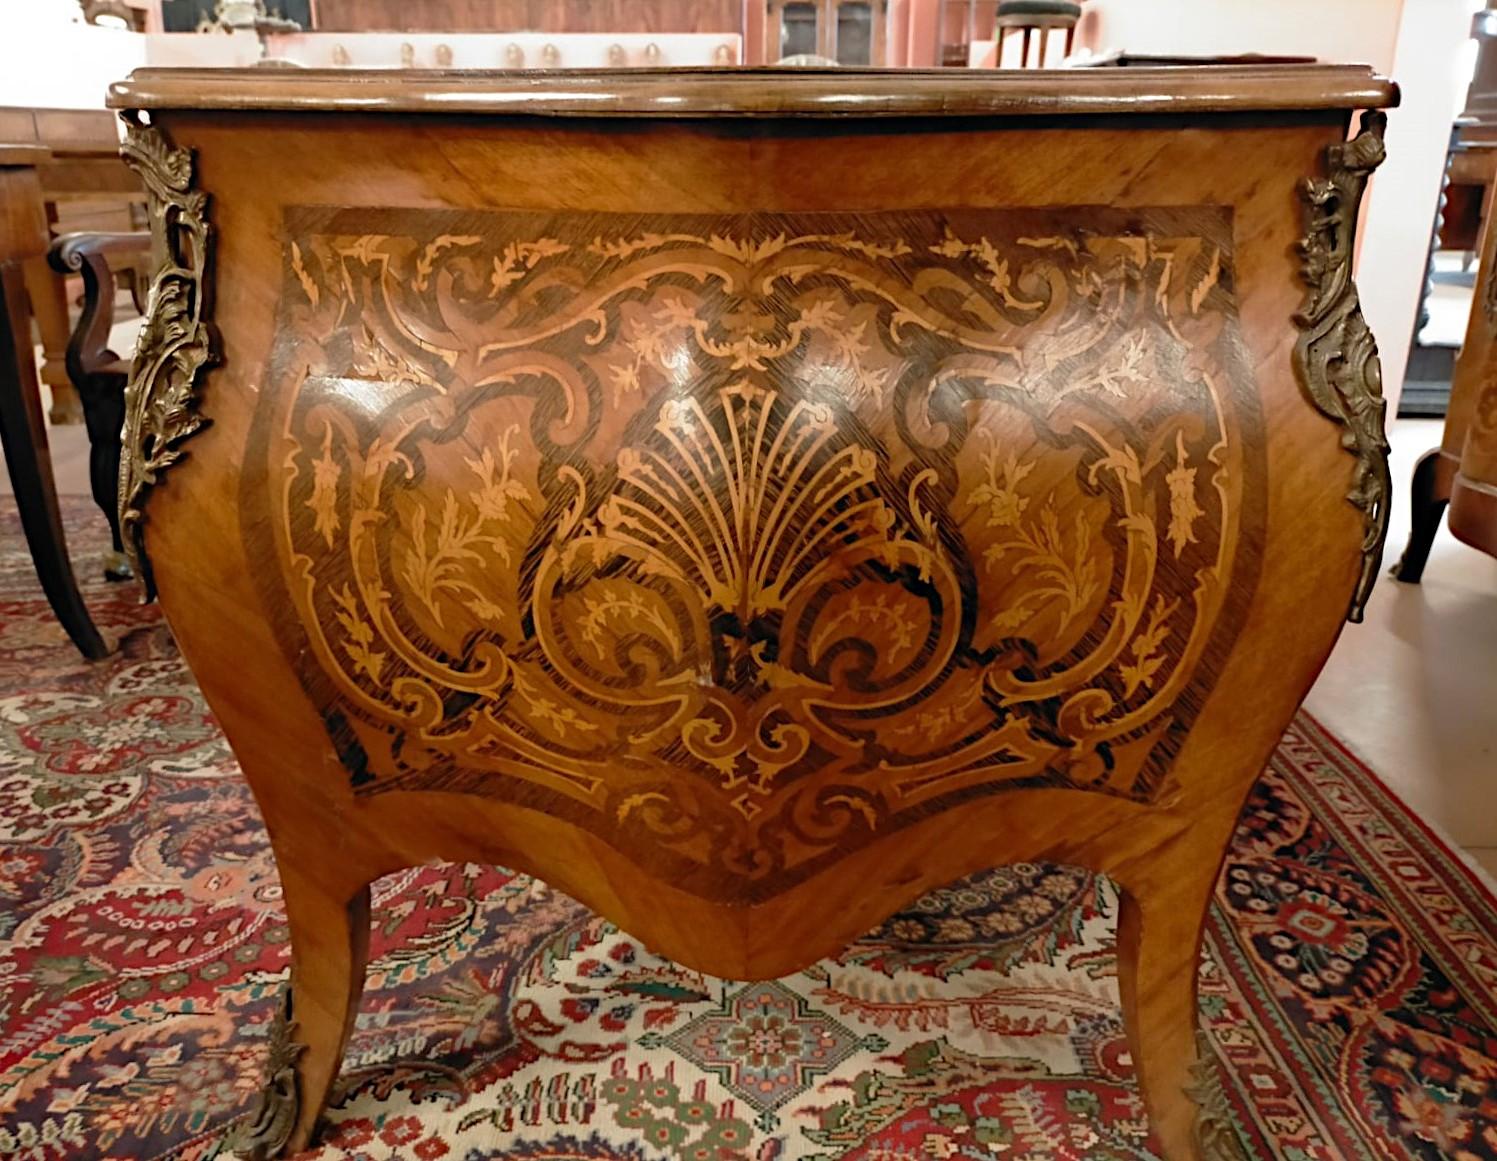 French center room desk
Period: early twentieth century
Elegant French center desk in 1700 style.
Entirely inlaid and moved, with leather top and beautiful bronze profiles.

Although it is a reproduction, the construction technique is the same used